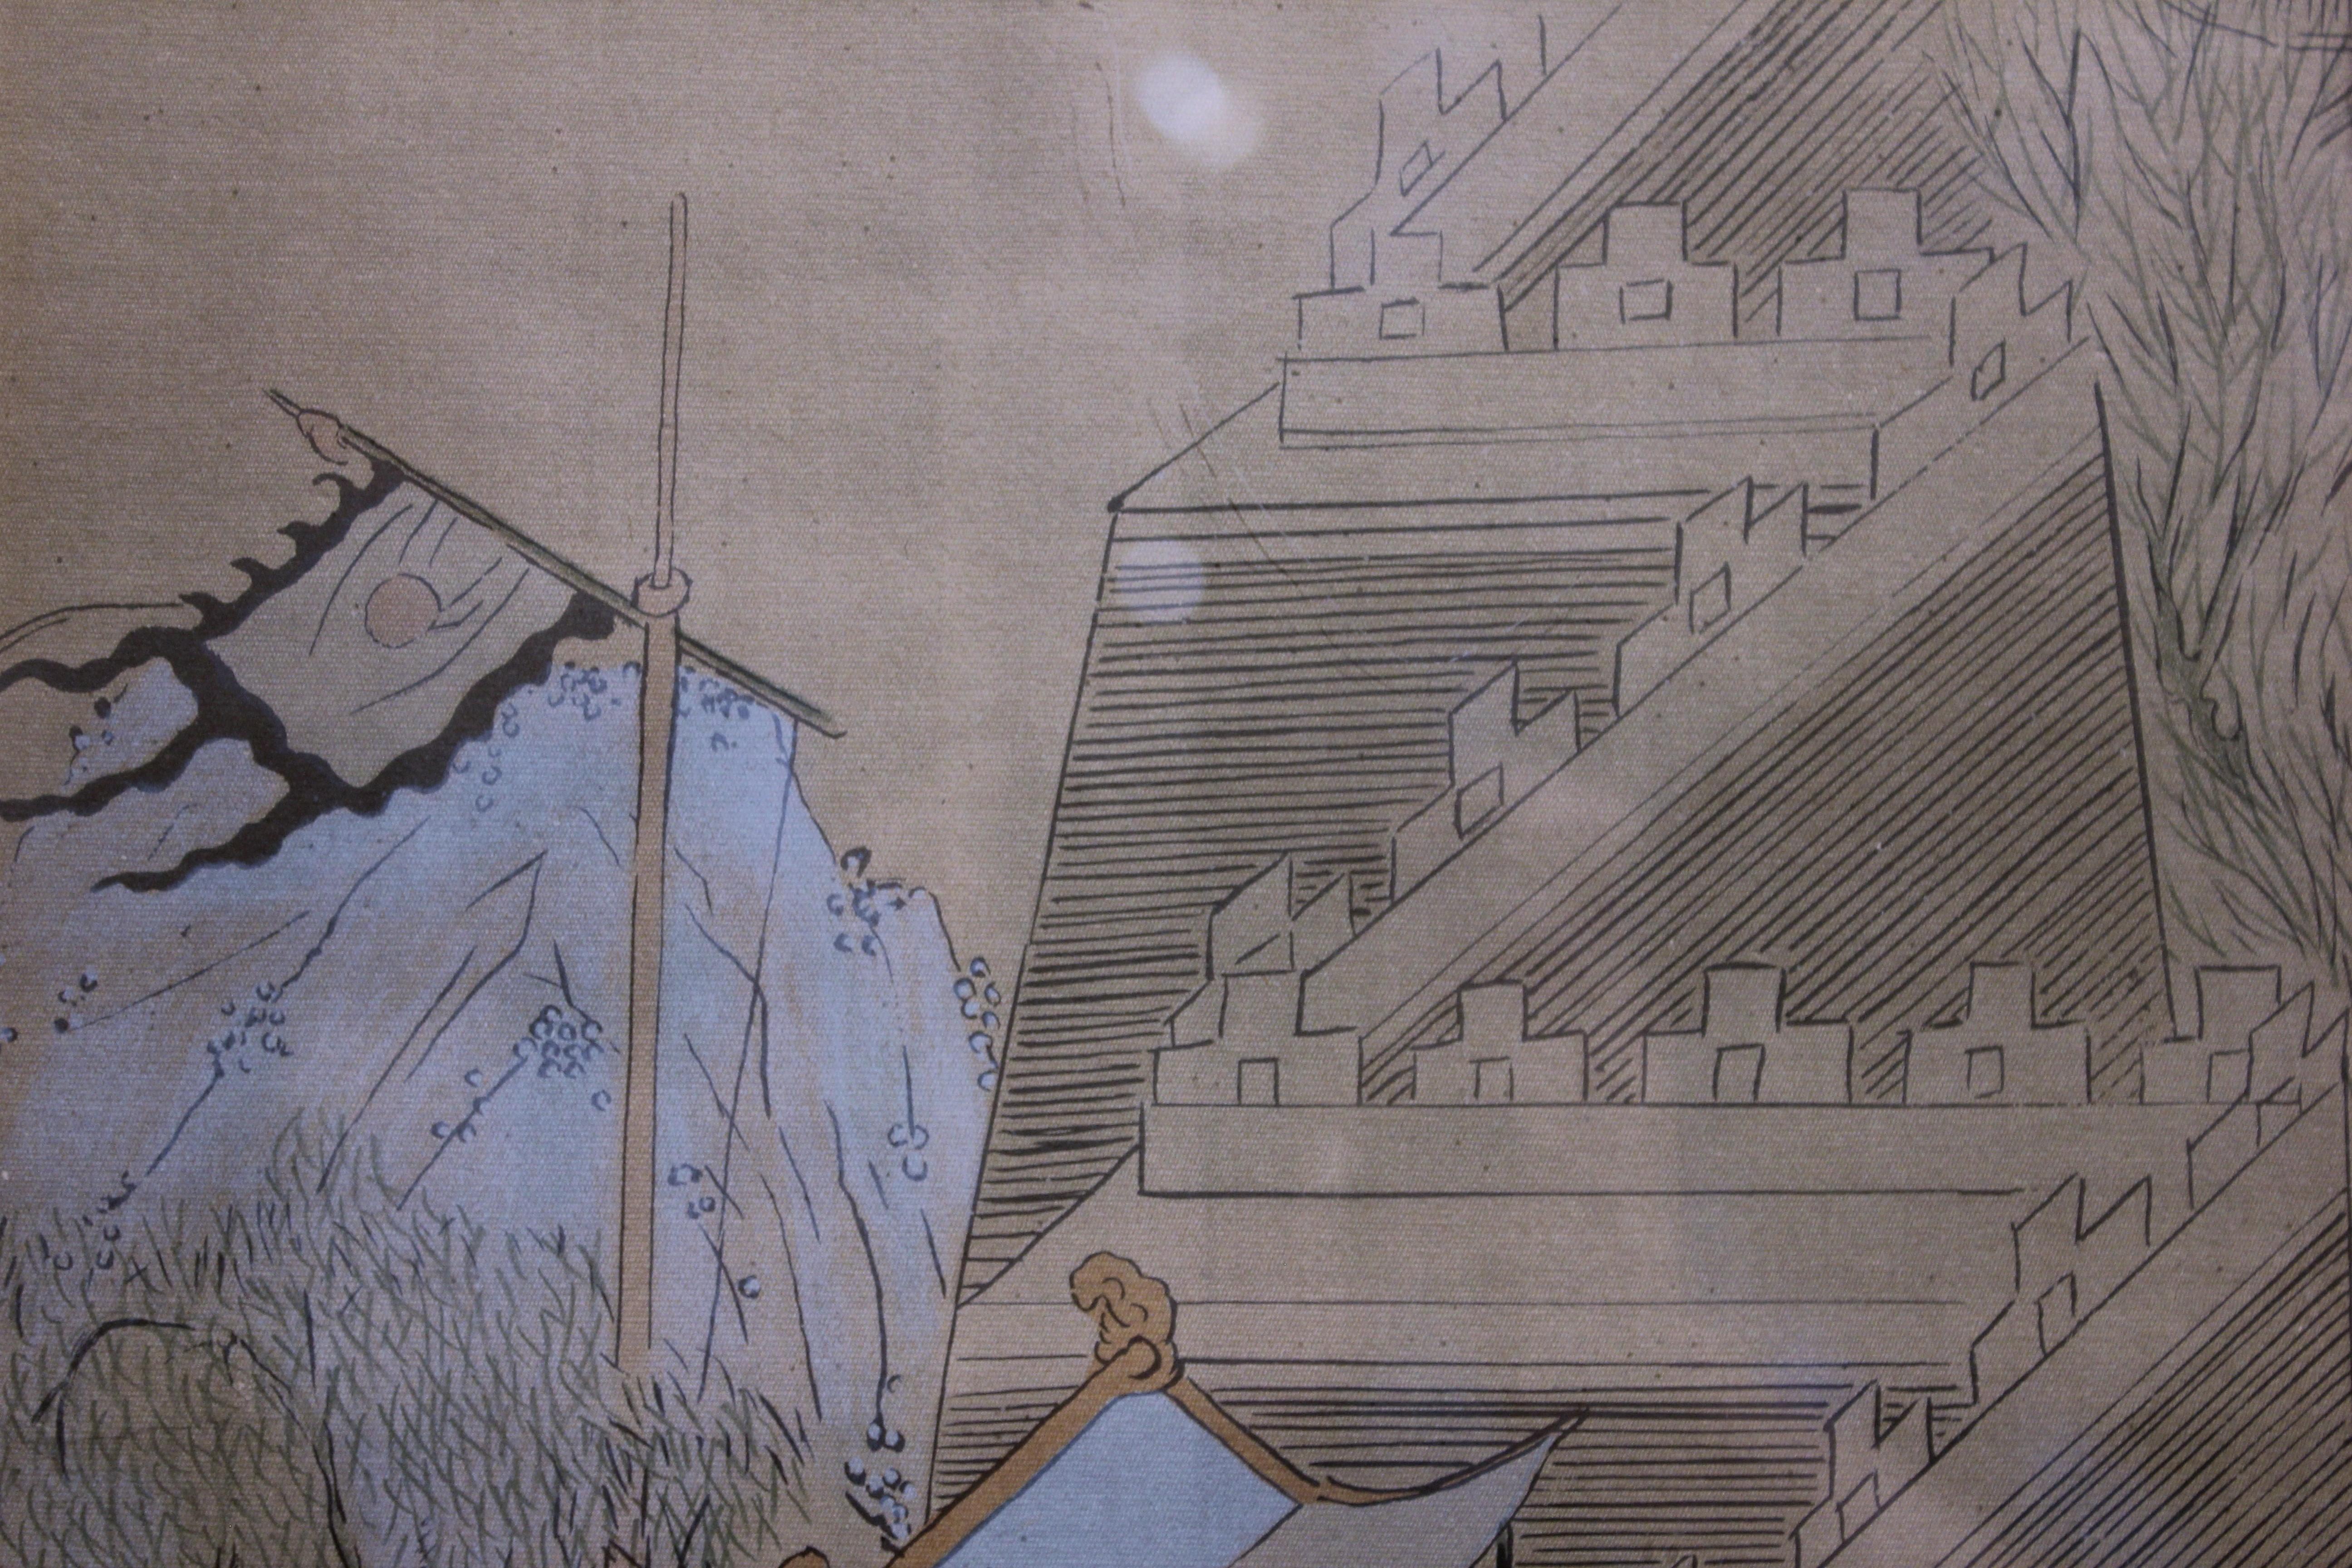 Chinese Architectural Landscape of the Great Wall - Print by Unknown